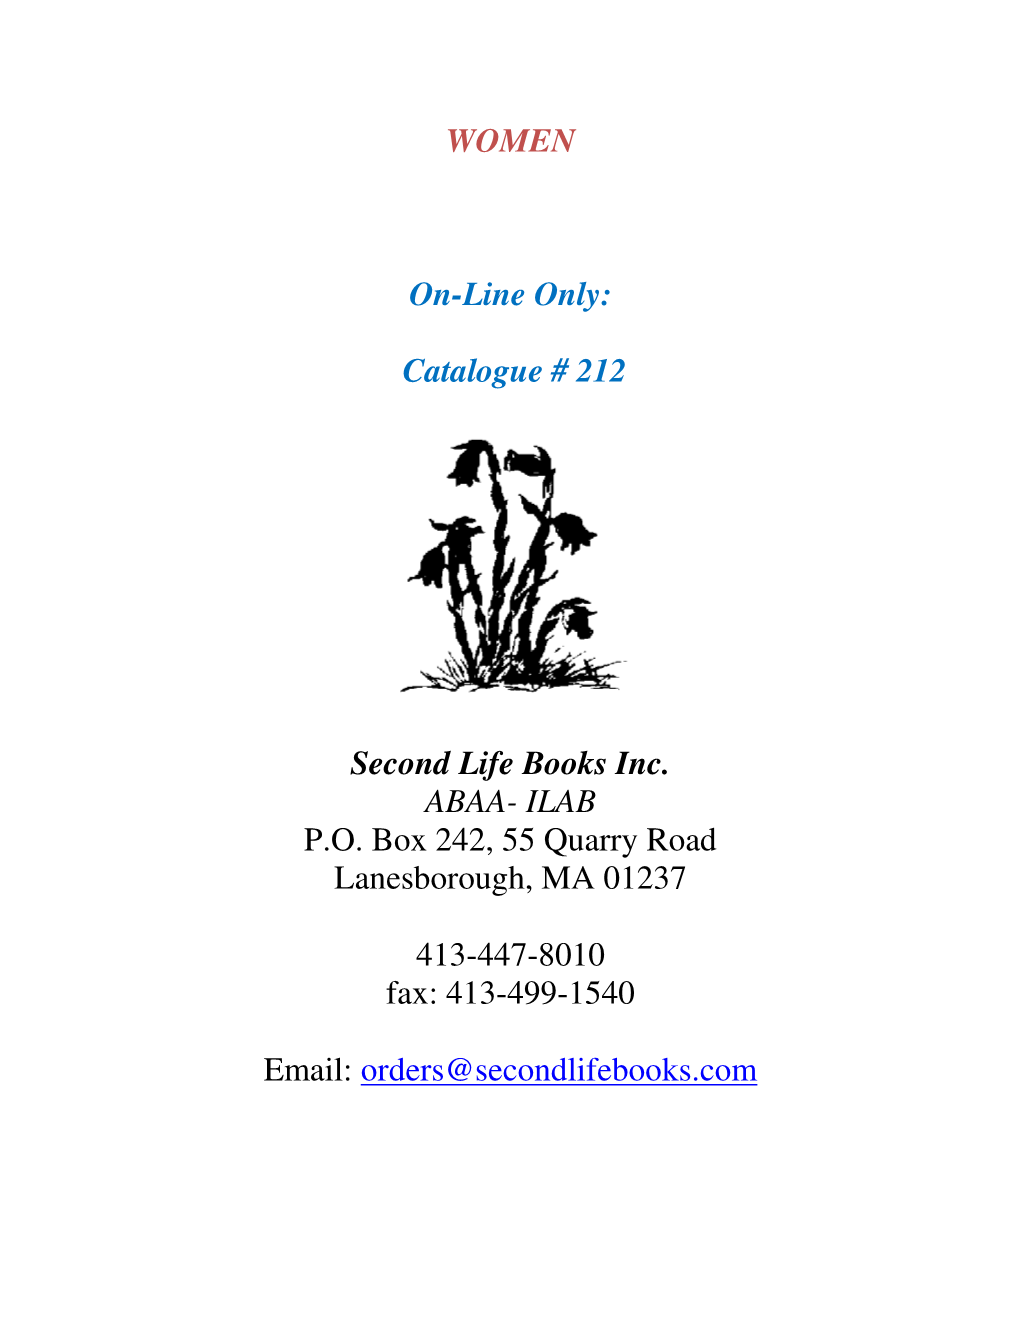 WOMEN On-Line Only: Catalogue # 212 Second Life Books Inc. ABAA